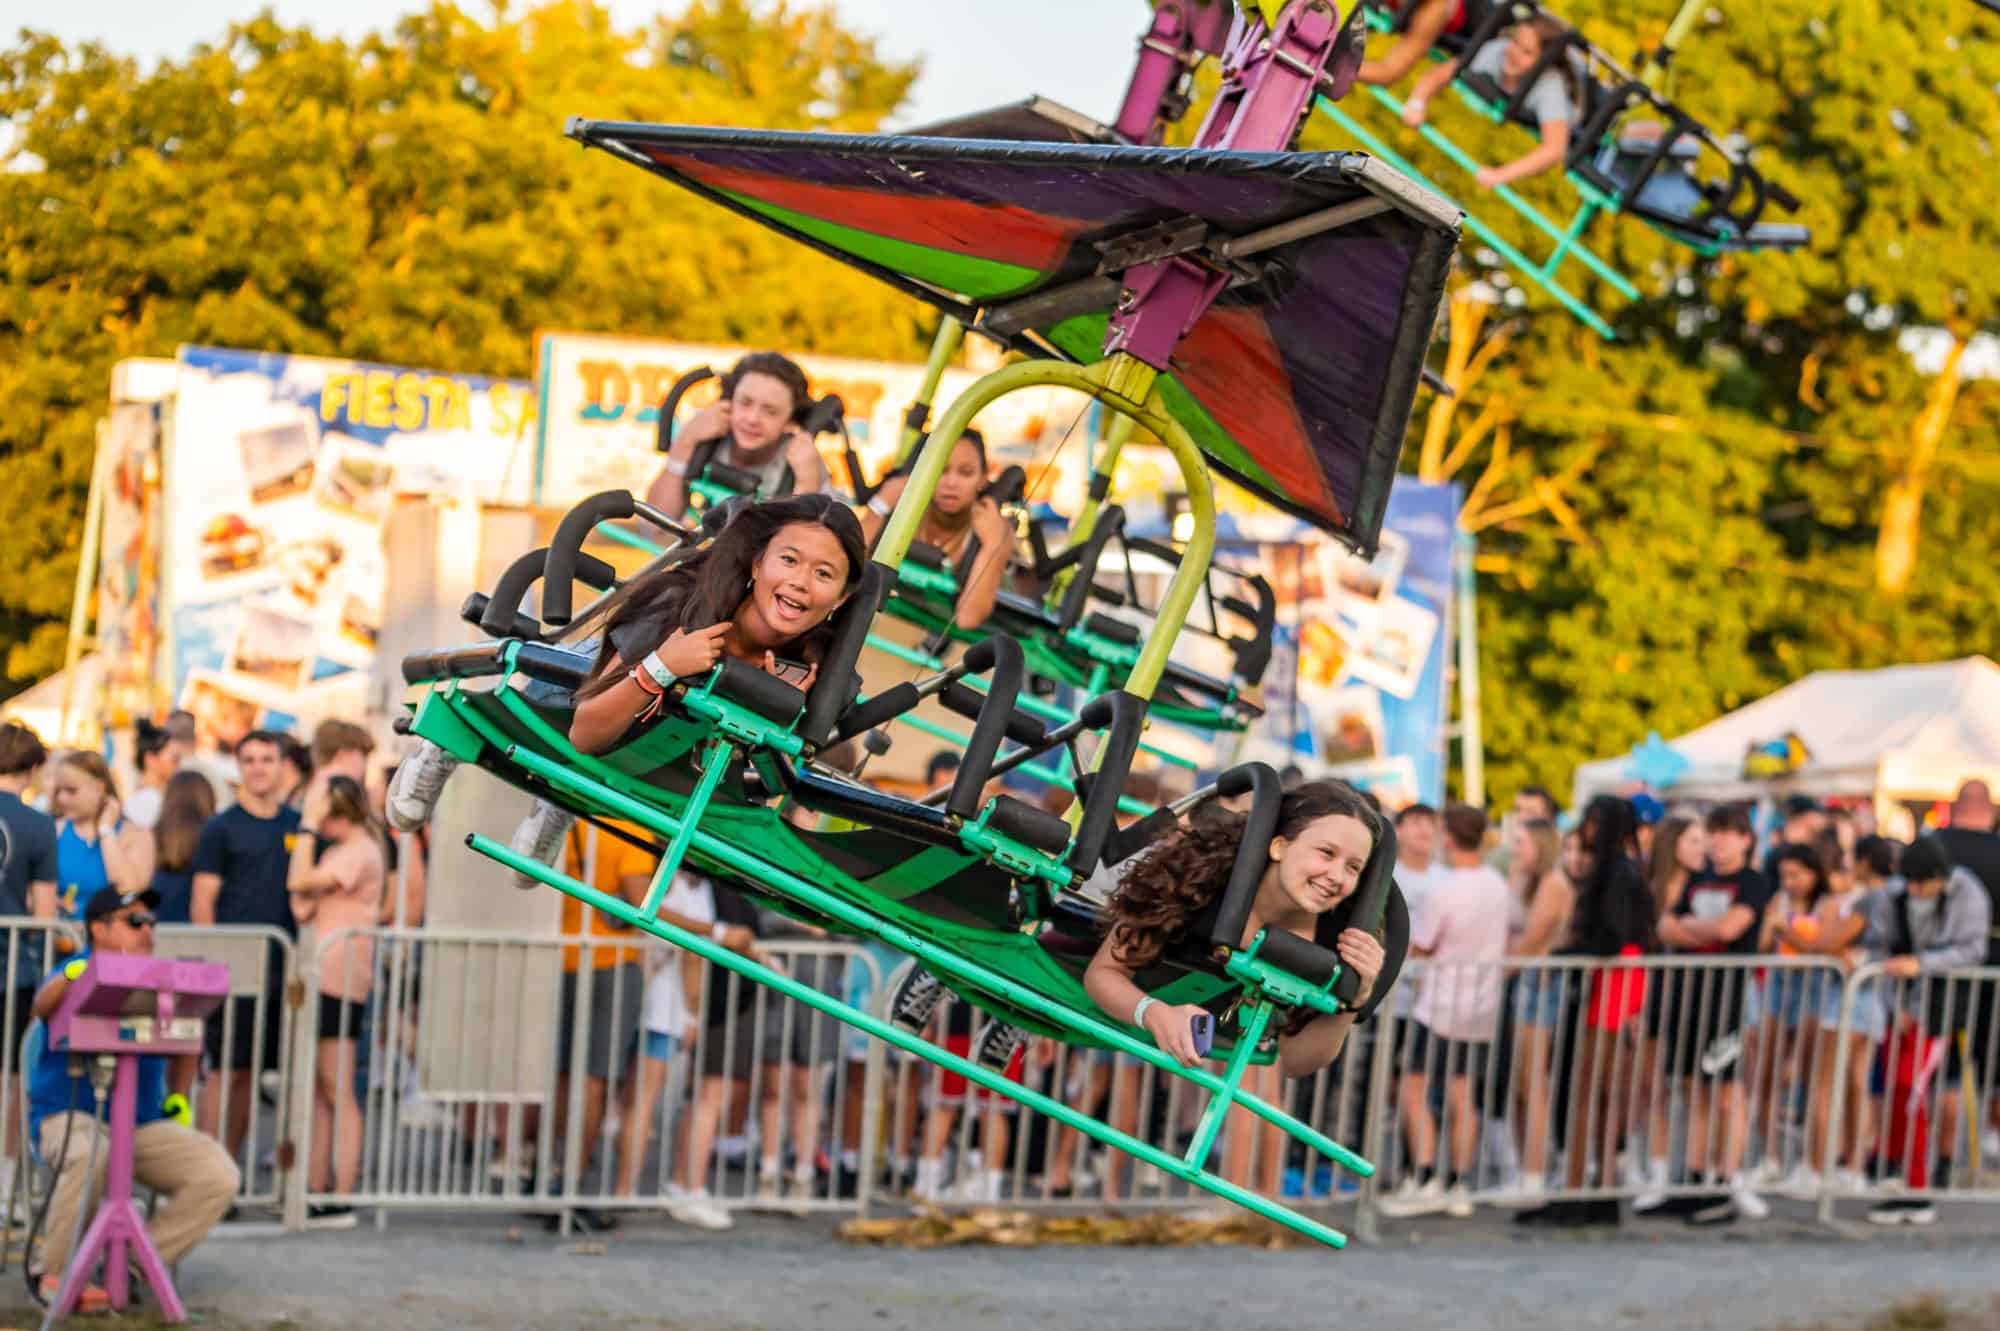 At the Marshfield fair an annual summertime tradition delivers family entertainment, nostalgia and new fun features.